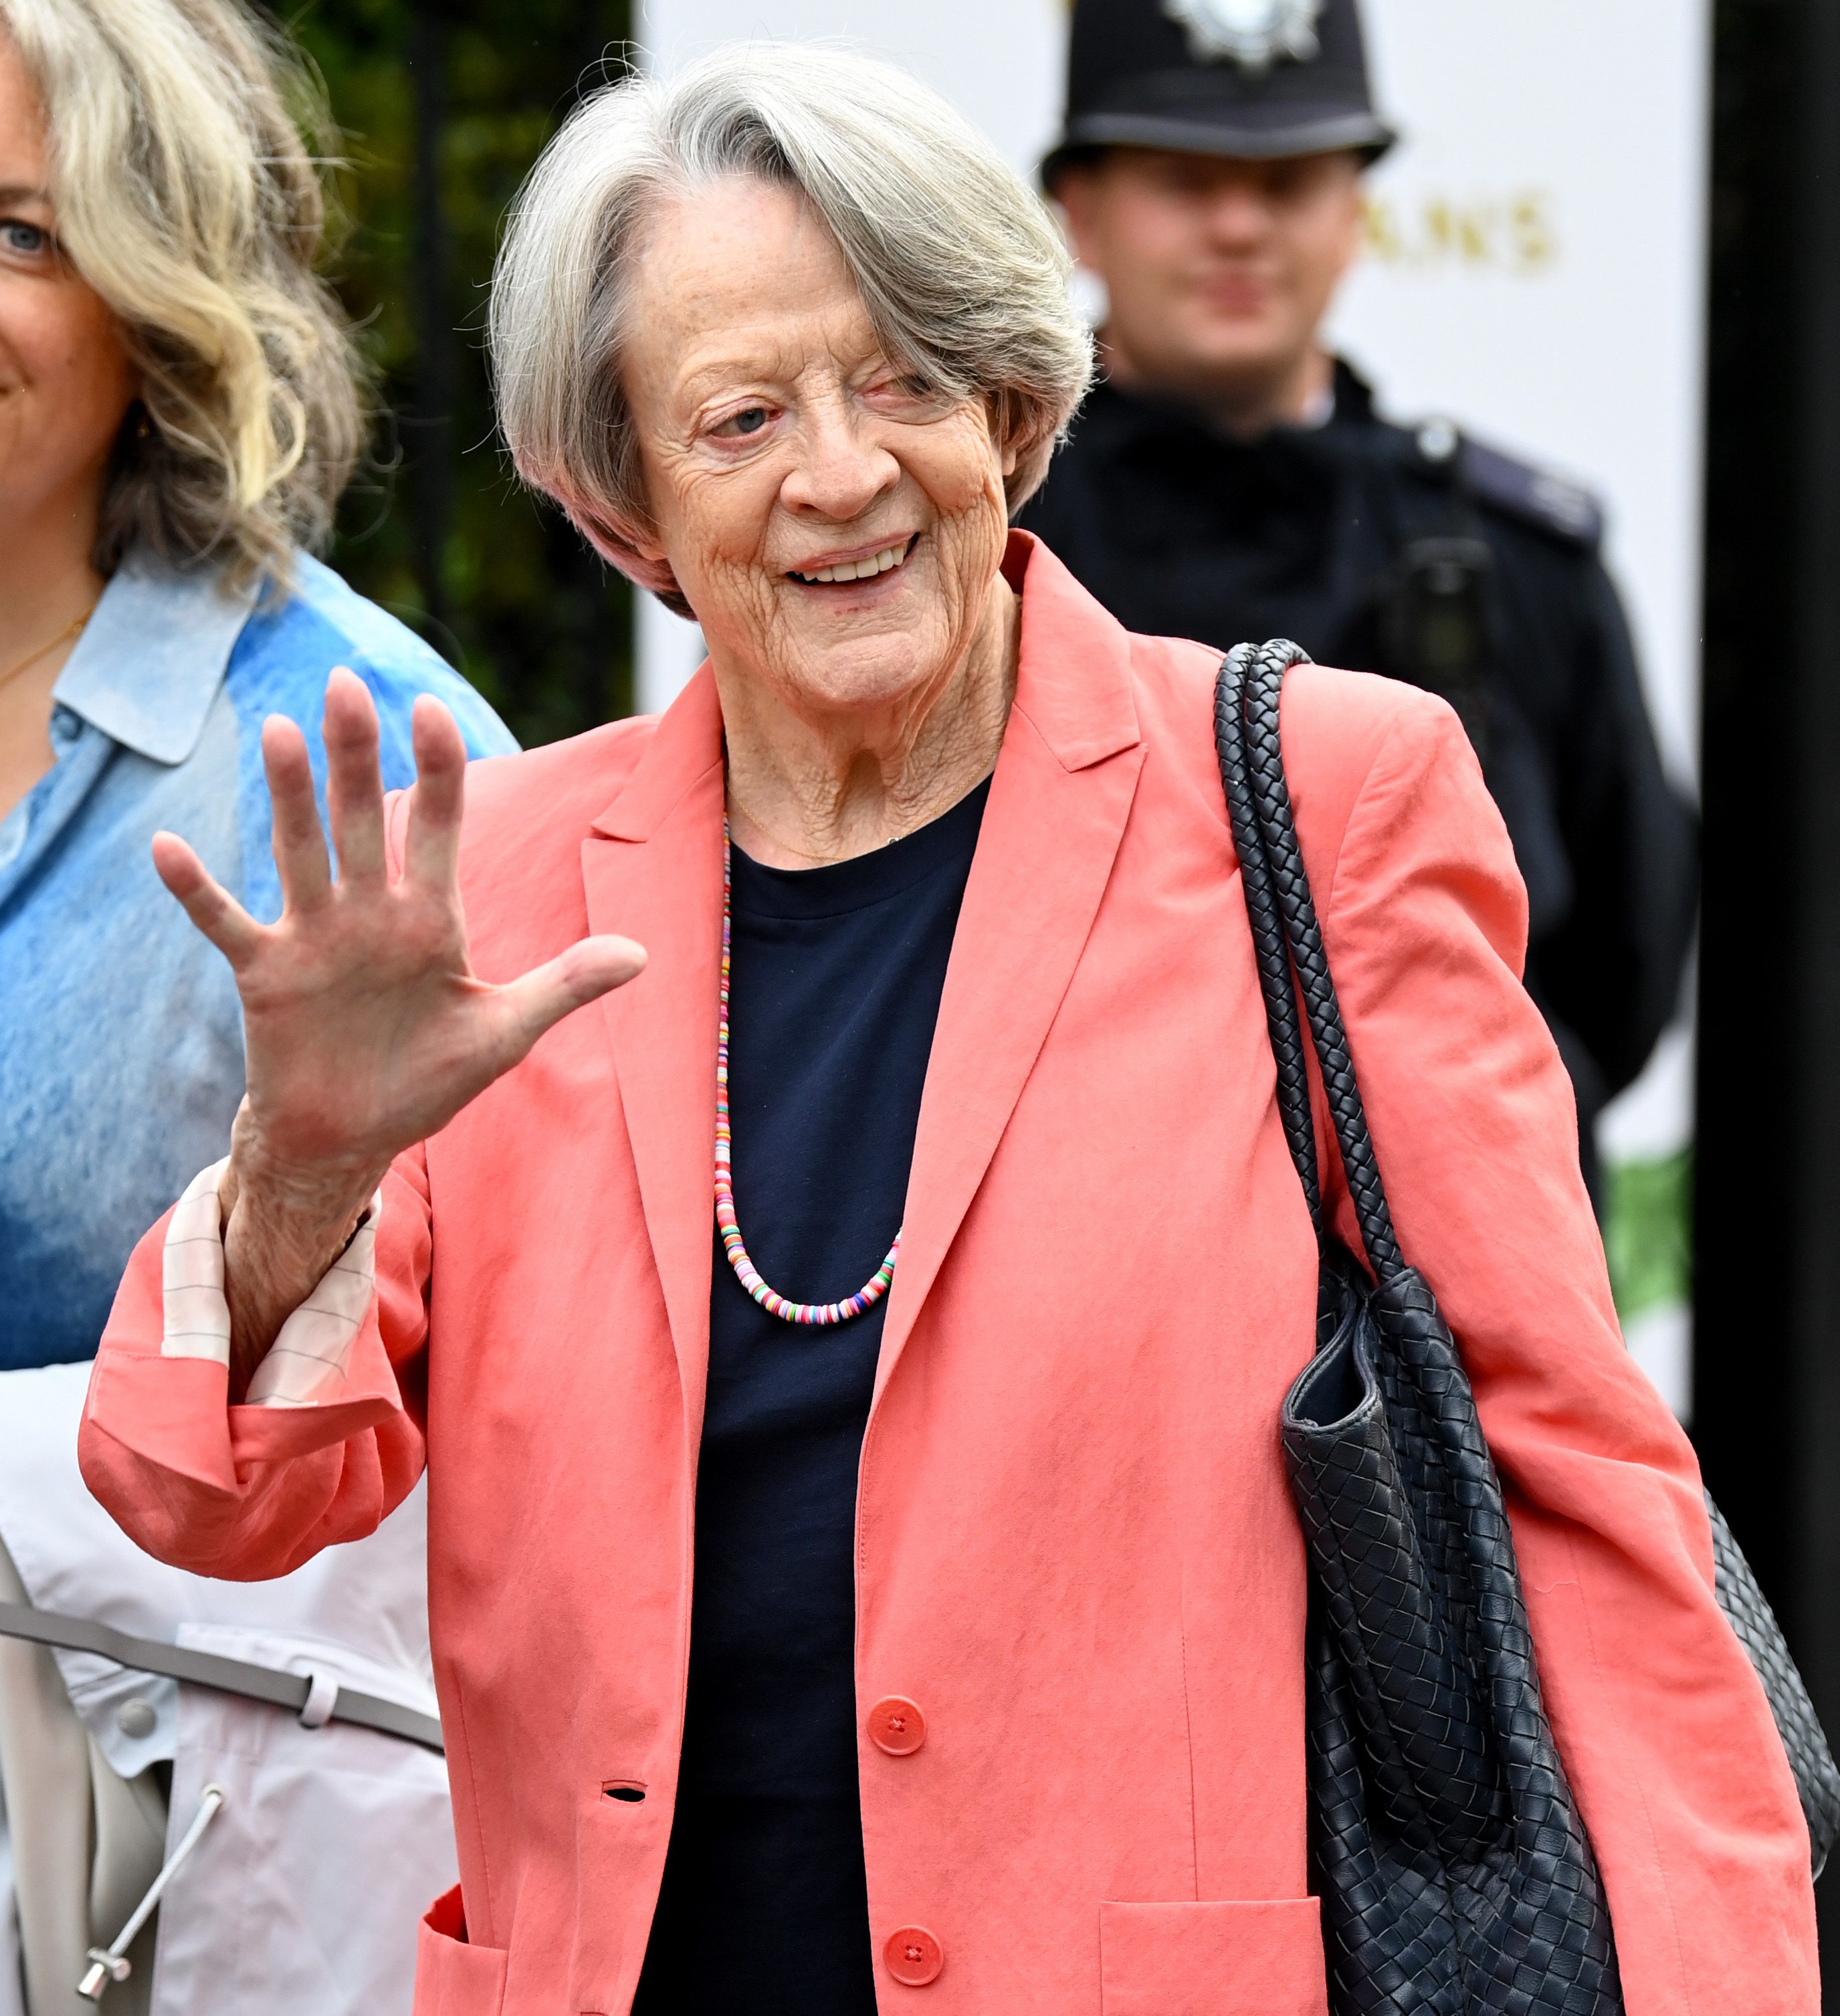 Maggie Smith waving and smiling as she walks